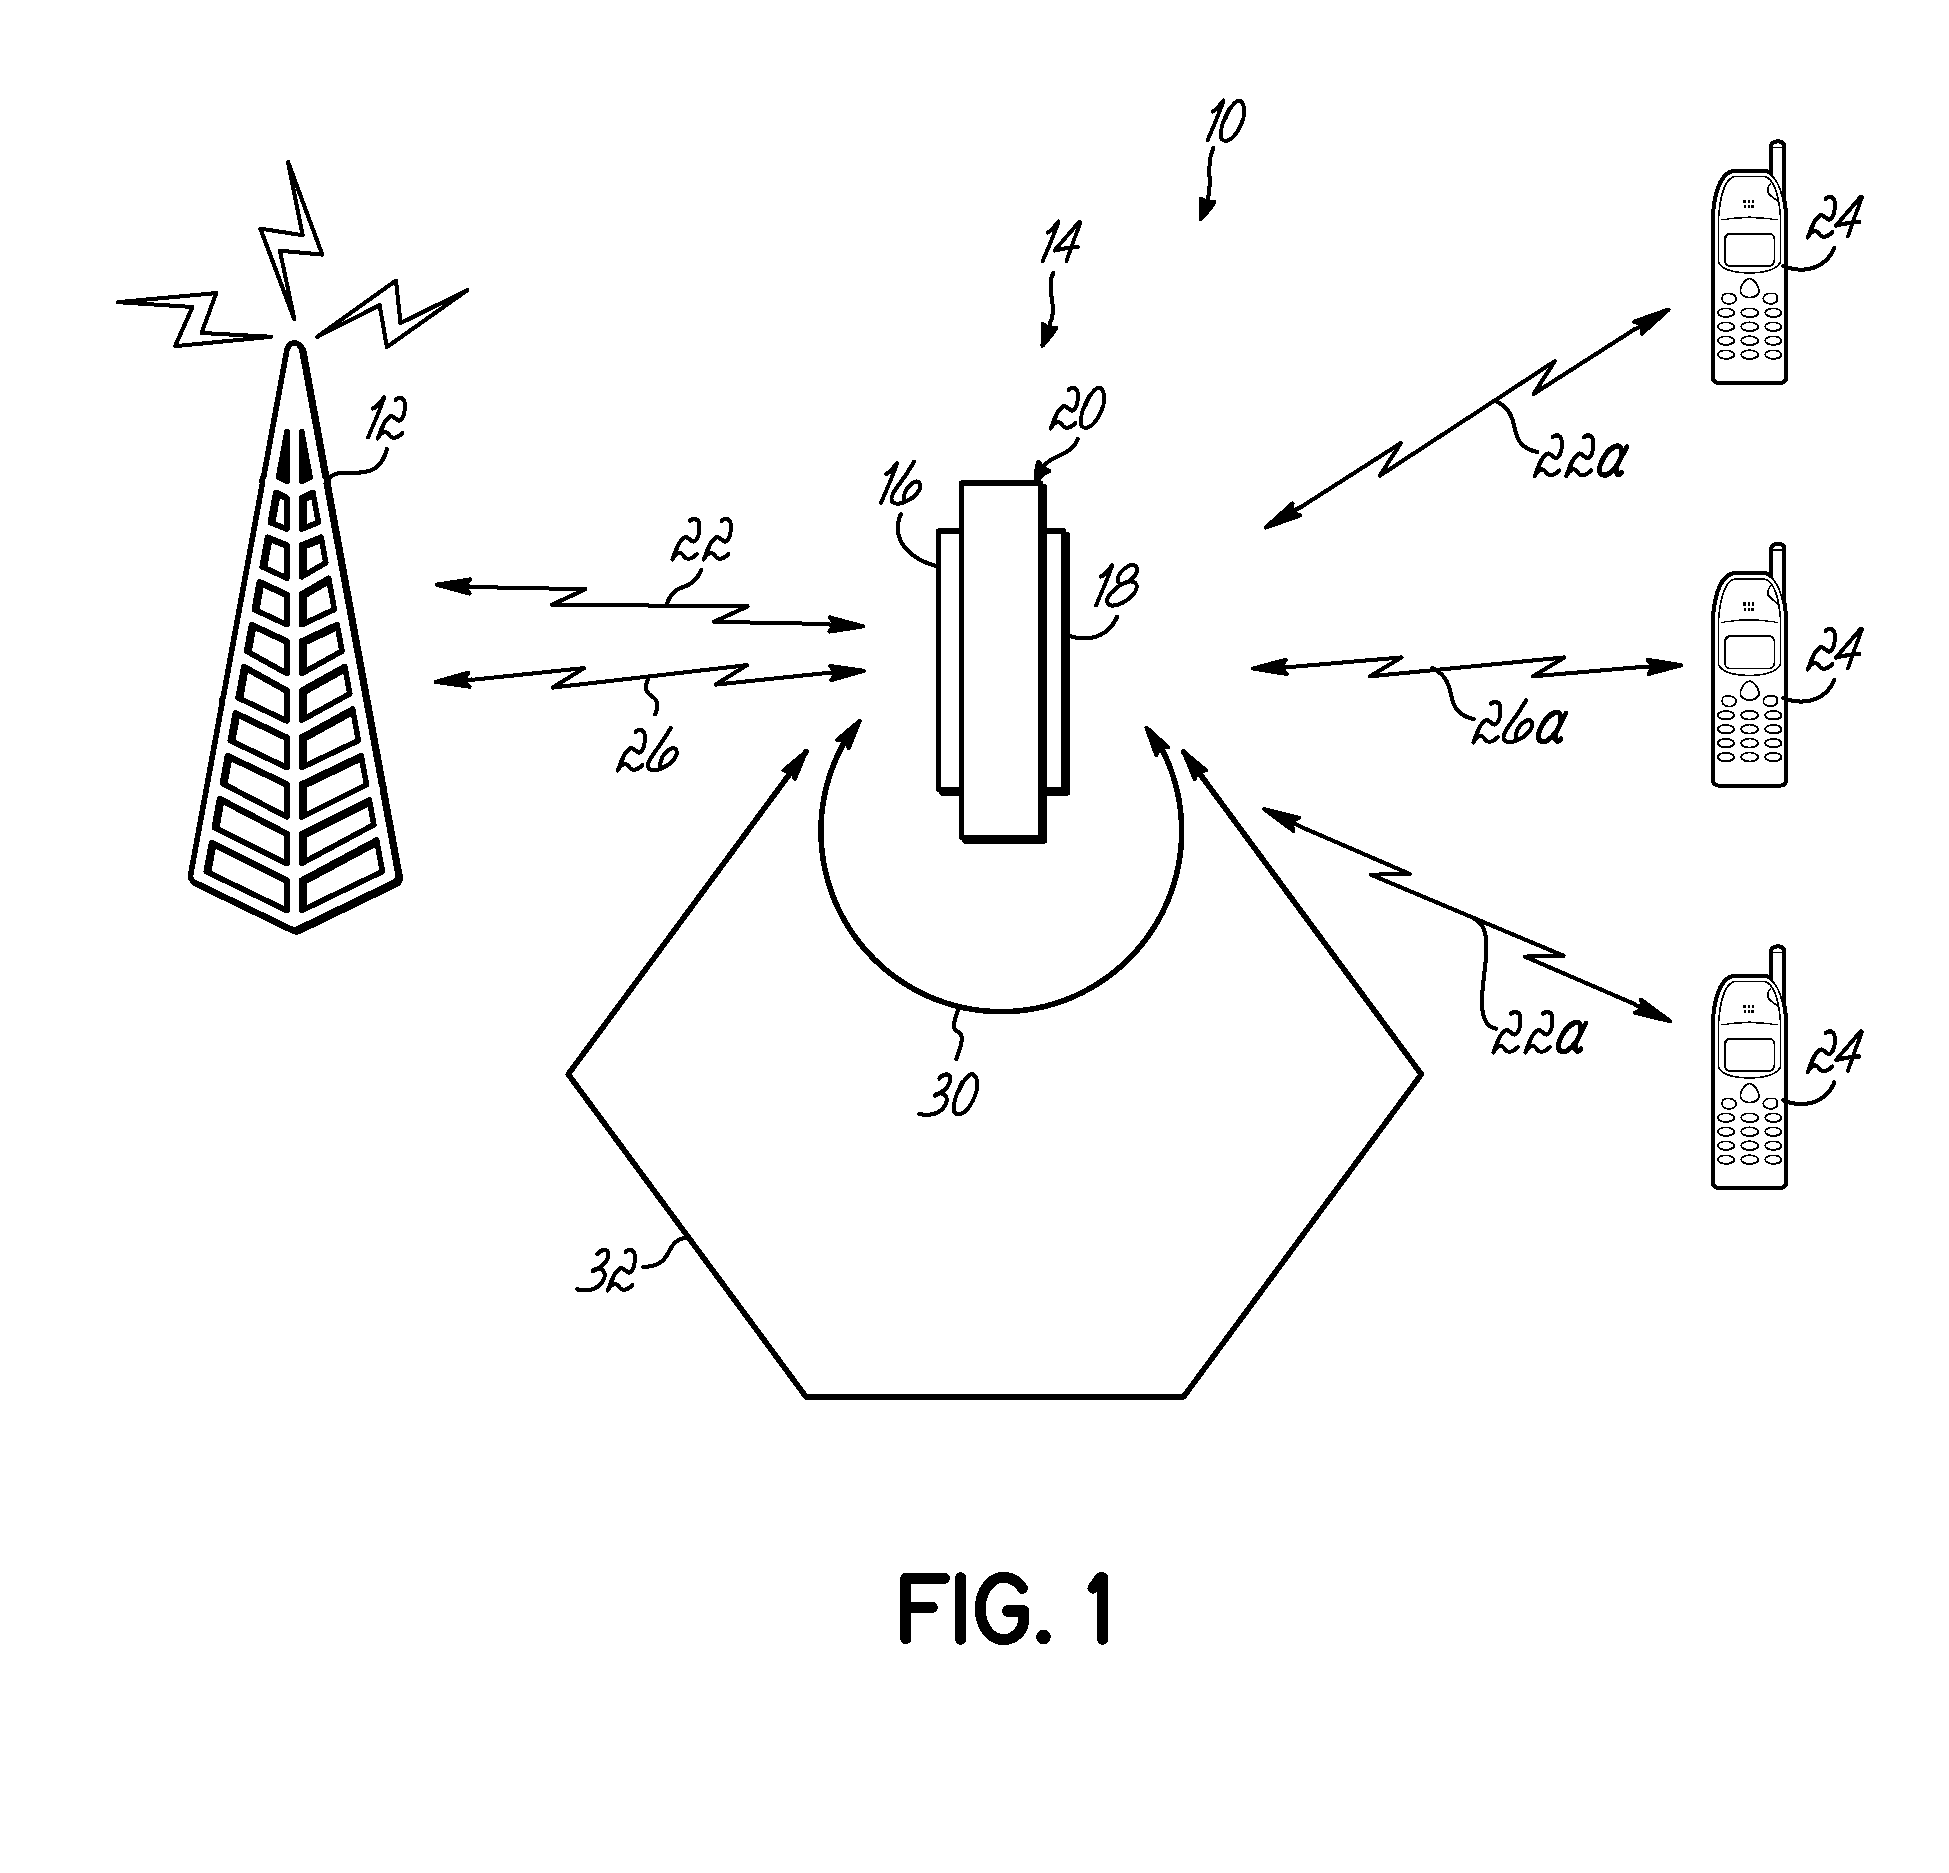 System and method for determining and controlling gain margin in an RF repeater